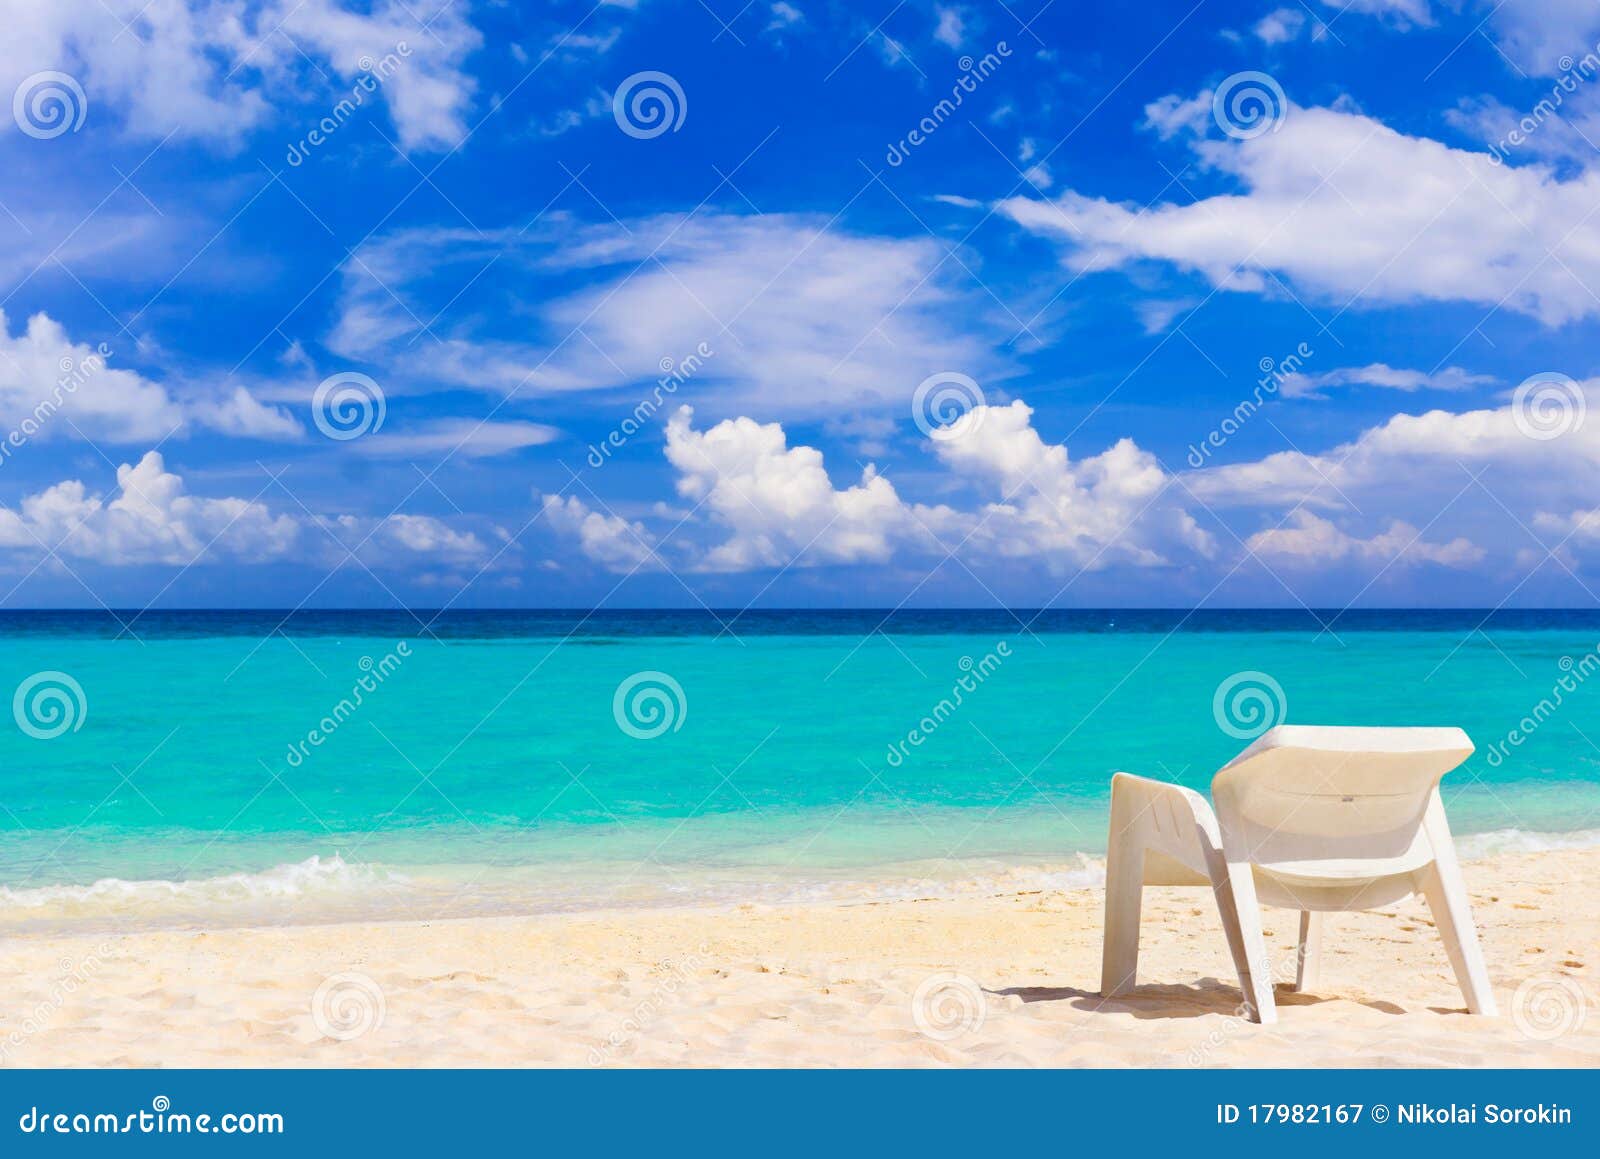 Chair on tropical beach stock image. Image of maldives - 17982167